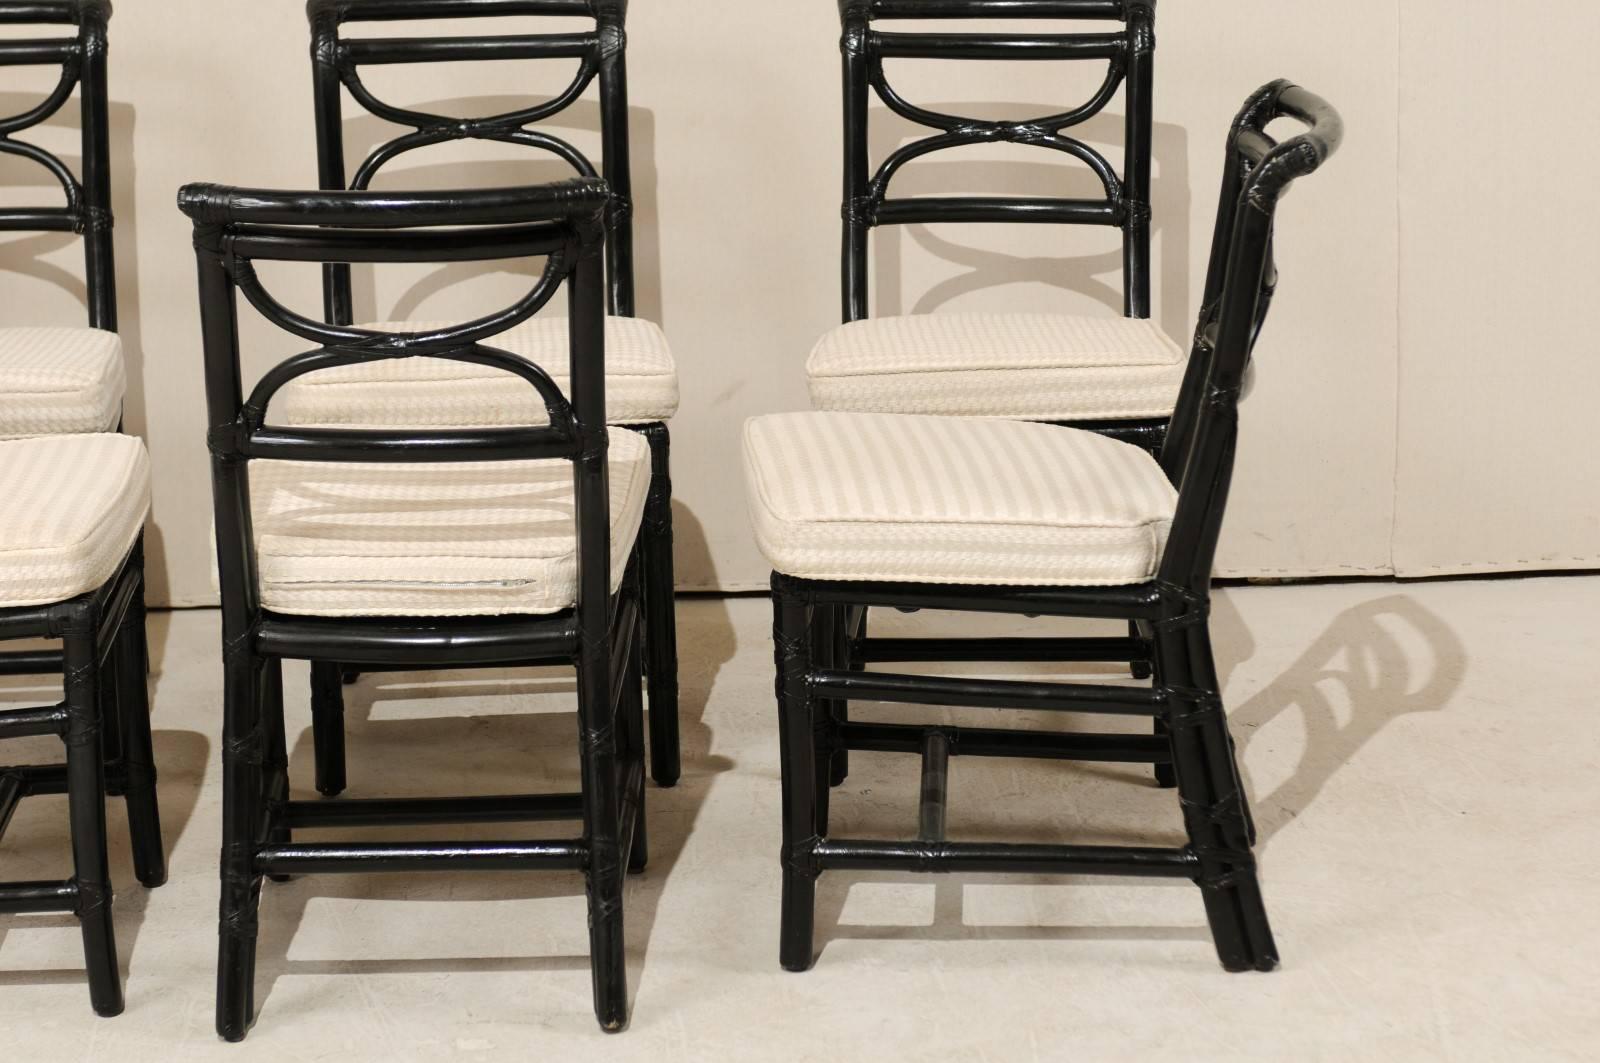 20th Century Set of Eight McGuire Rattan Dining Side Chairs in Black, Curule Shaped Backs